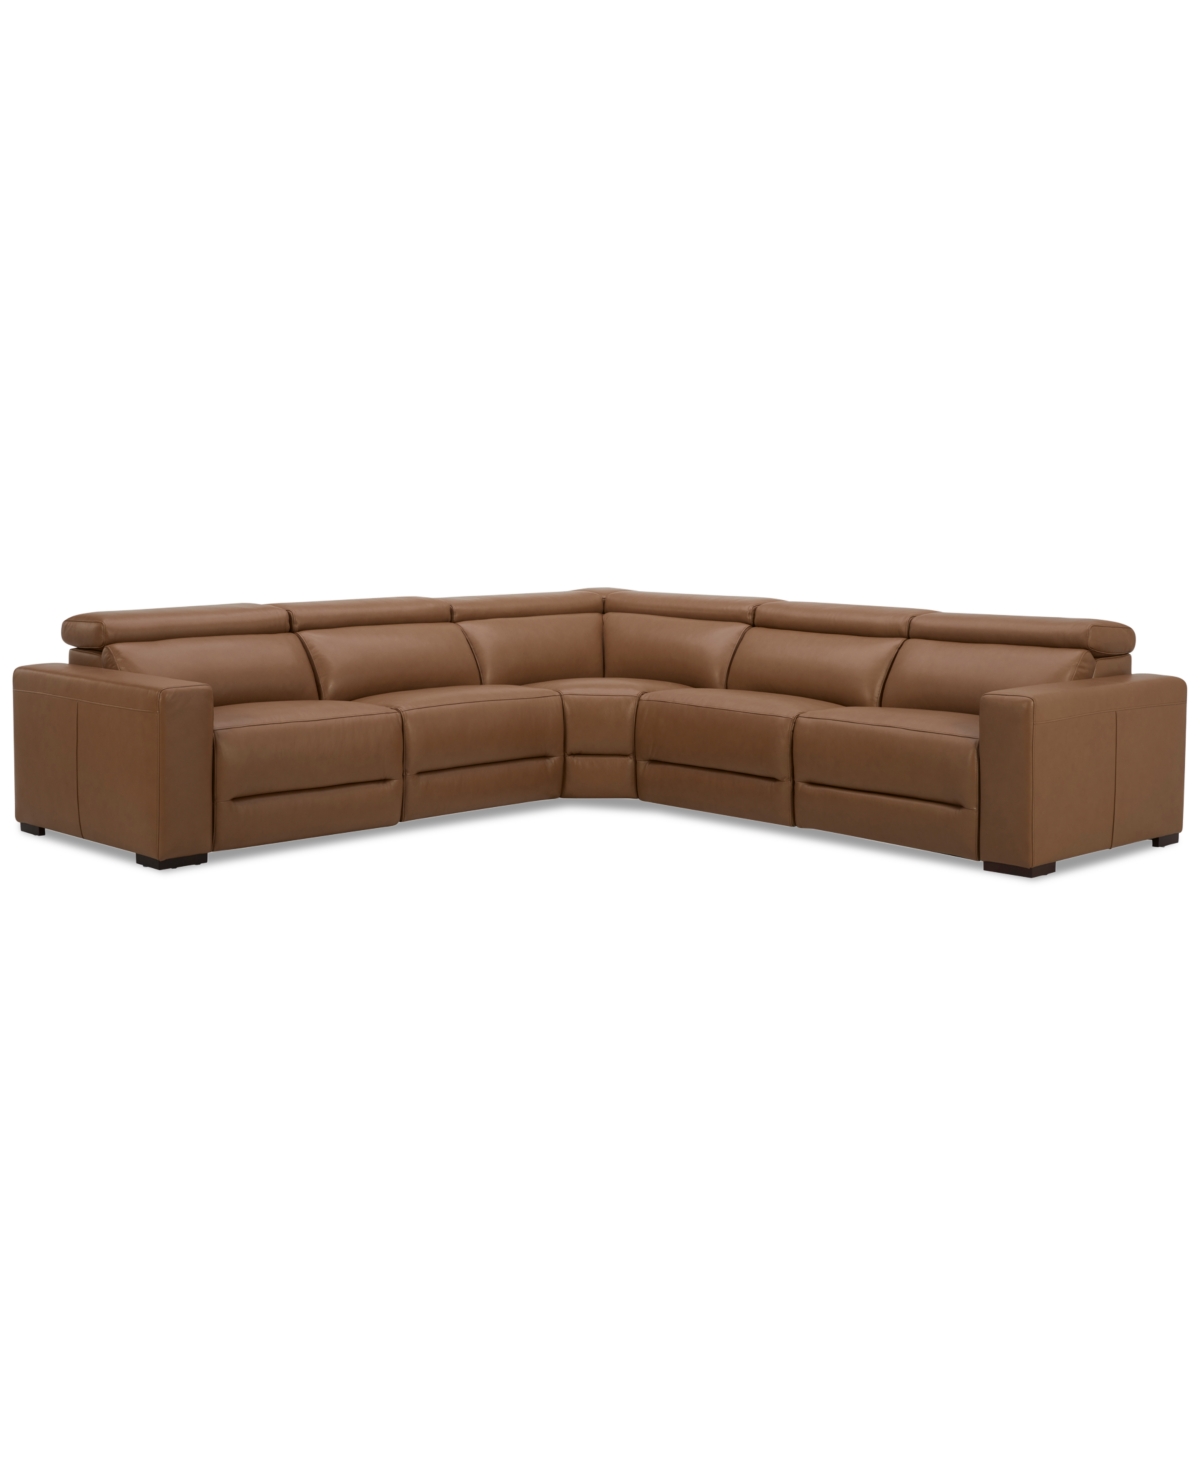 Macy's Nevio 124" 5-pc. Leather Sectional With 3 Power Recliners And Headrests, Created For  In Butternut